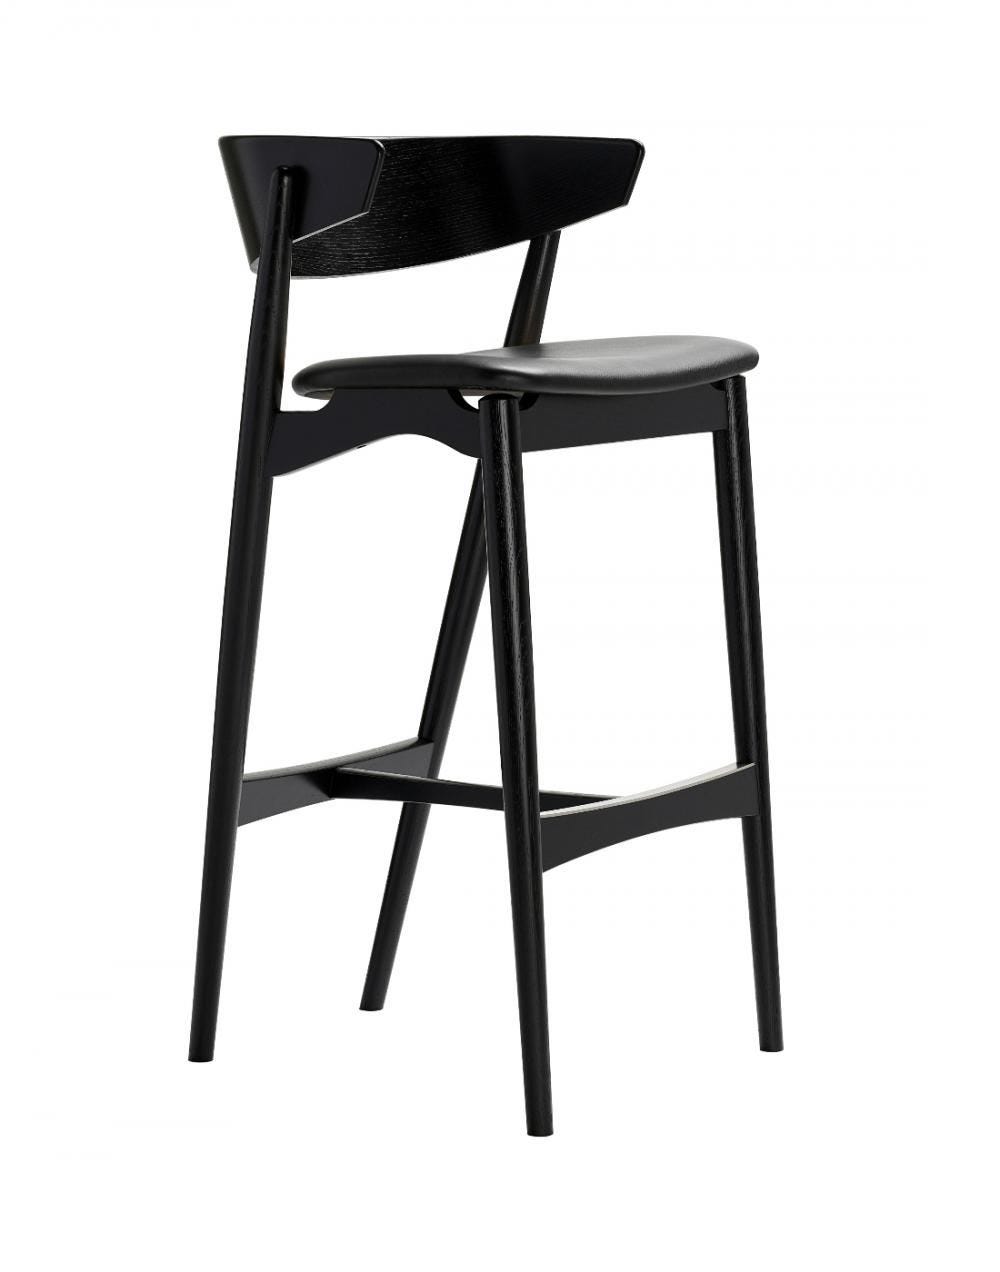 Sibast No 7 Stool With Back Rest Black Oak Black Leather Kitchen Counter Stool 65cm Designer Furniture From Holloways Of Ludlow